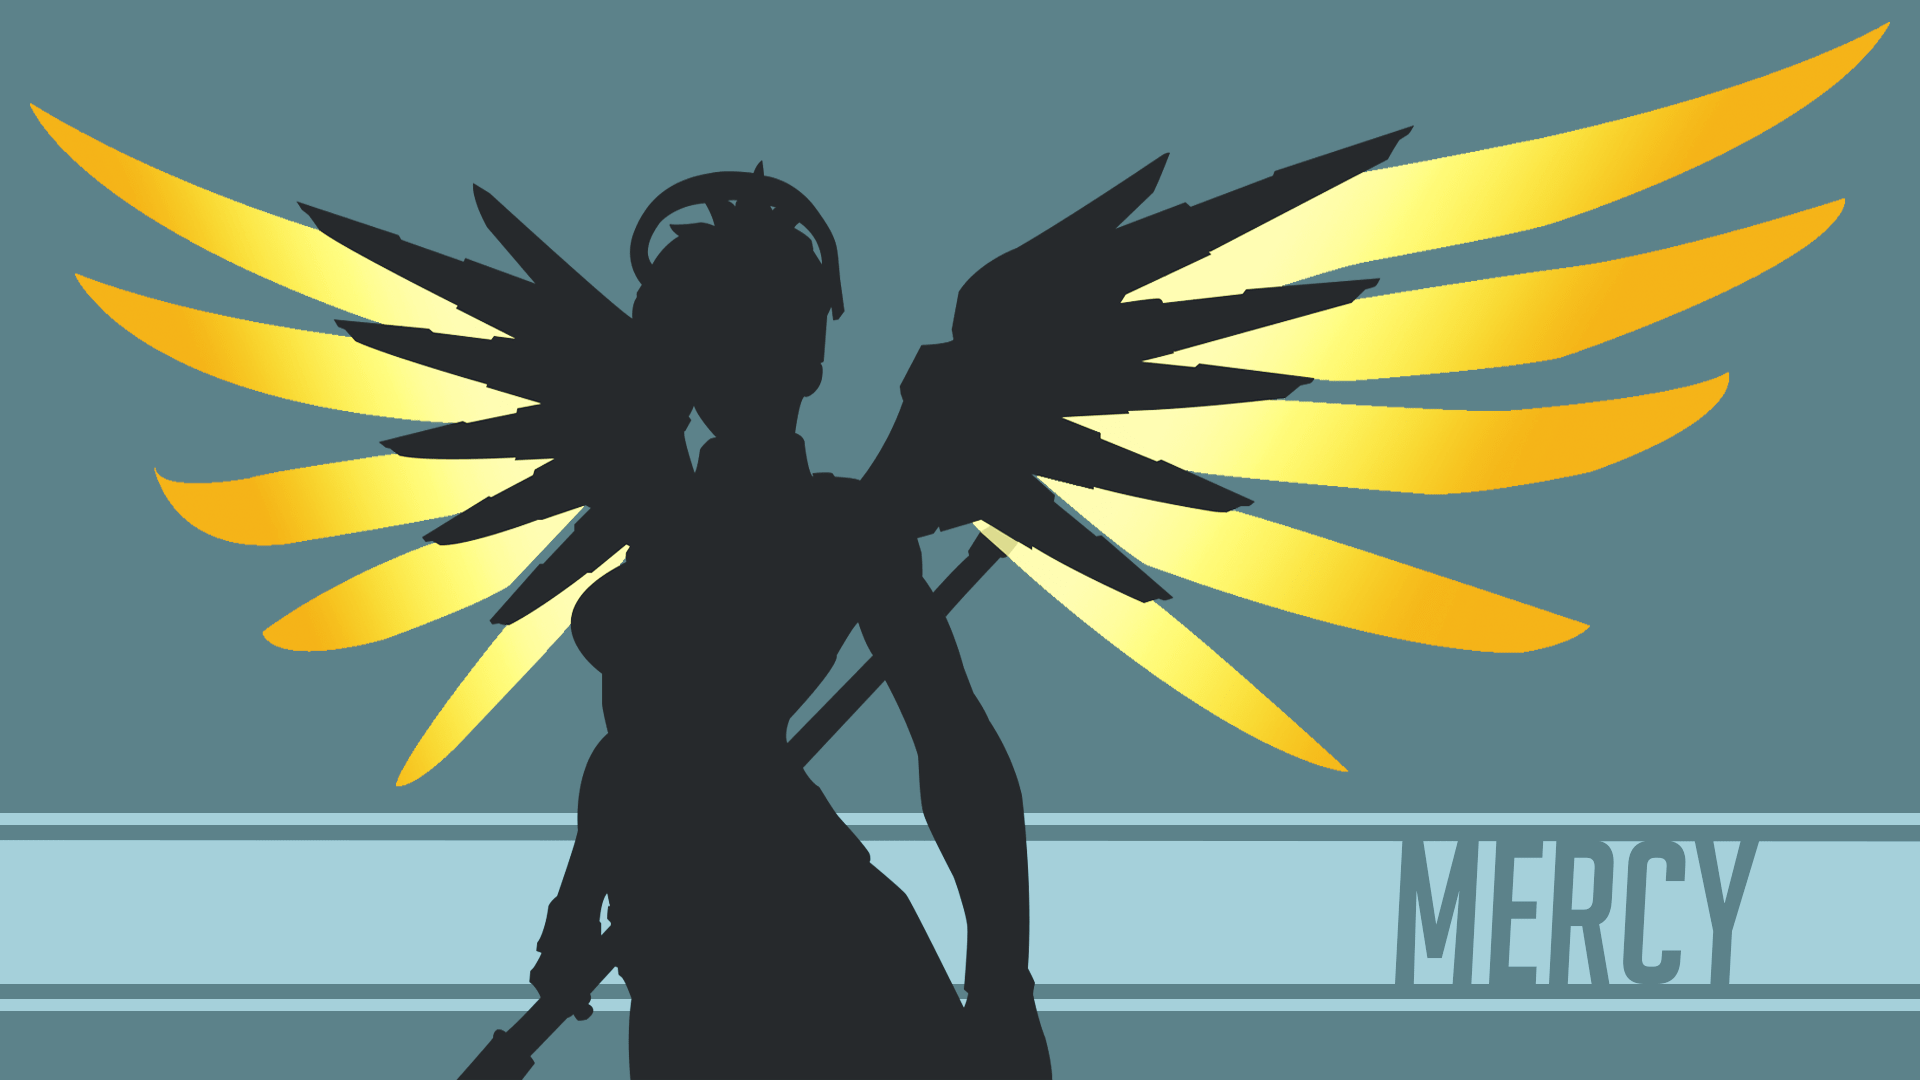 overwatch wallpaper,wing,graphic design,fictional character,graphics,animation